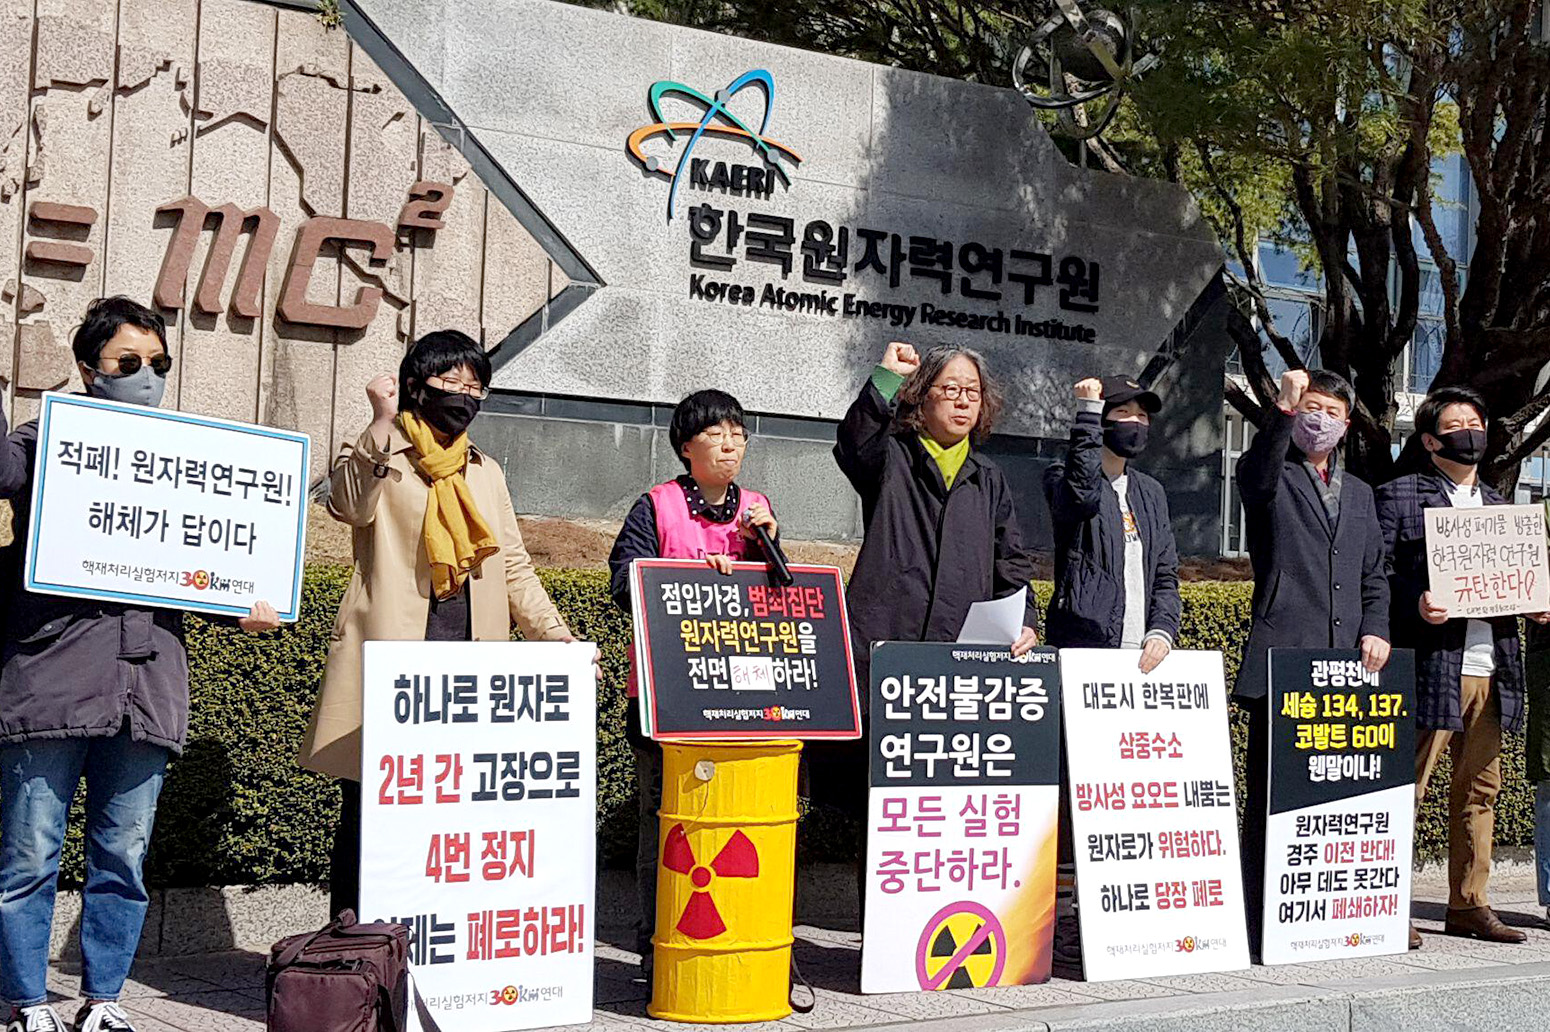 Anti-nuclear protestors call for the shutdown of the Korea Atomic Energy Research Institute in Daejeon, South Korea, on 20 March 2020. Credit: Newscom / Alamy Stock Photo. 2B84RWX